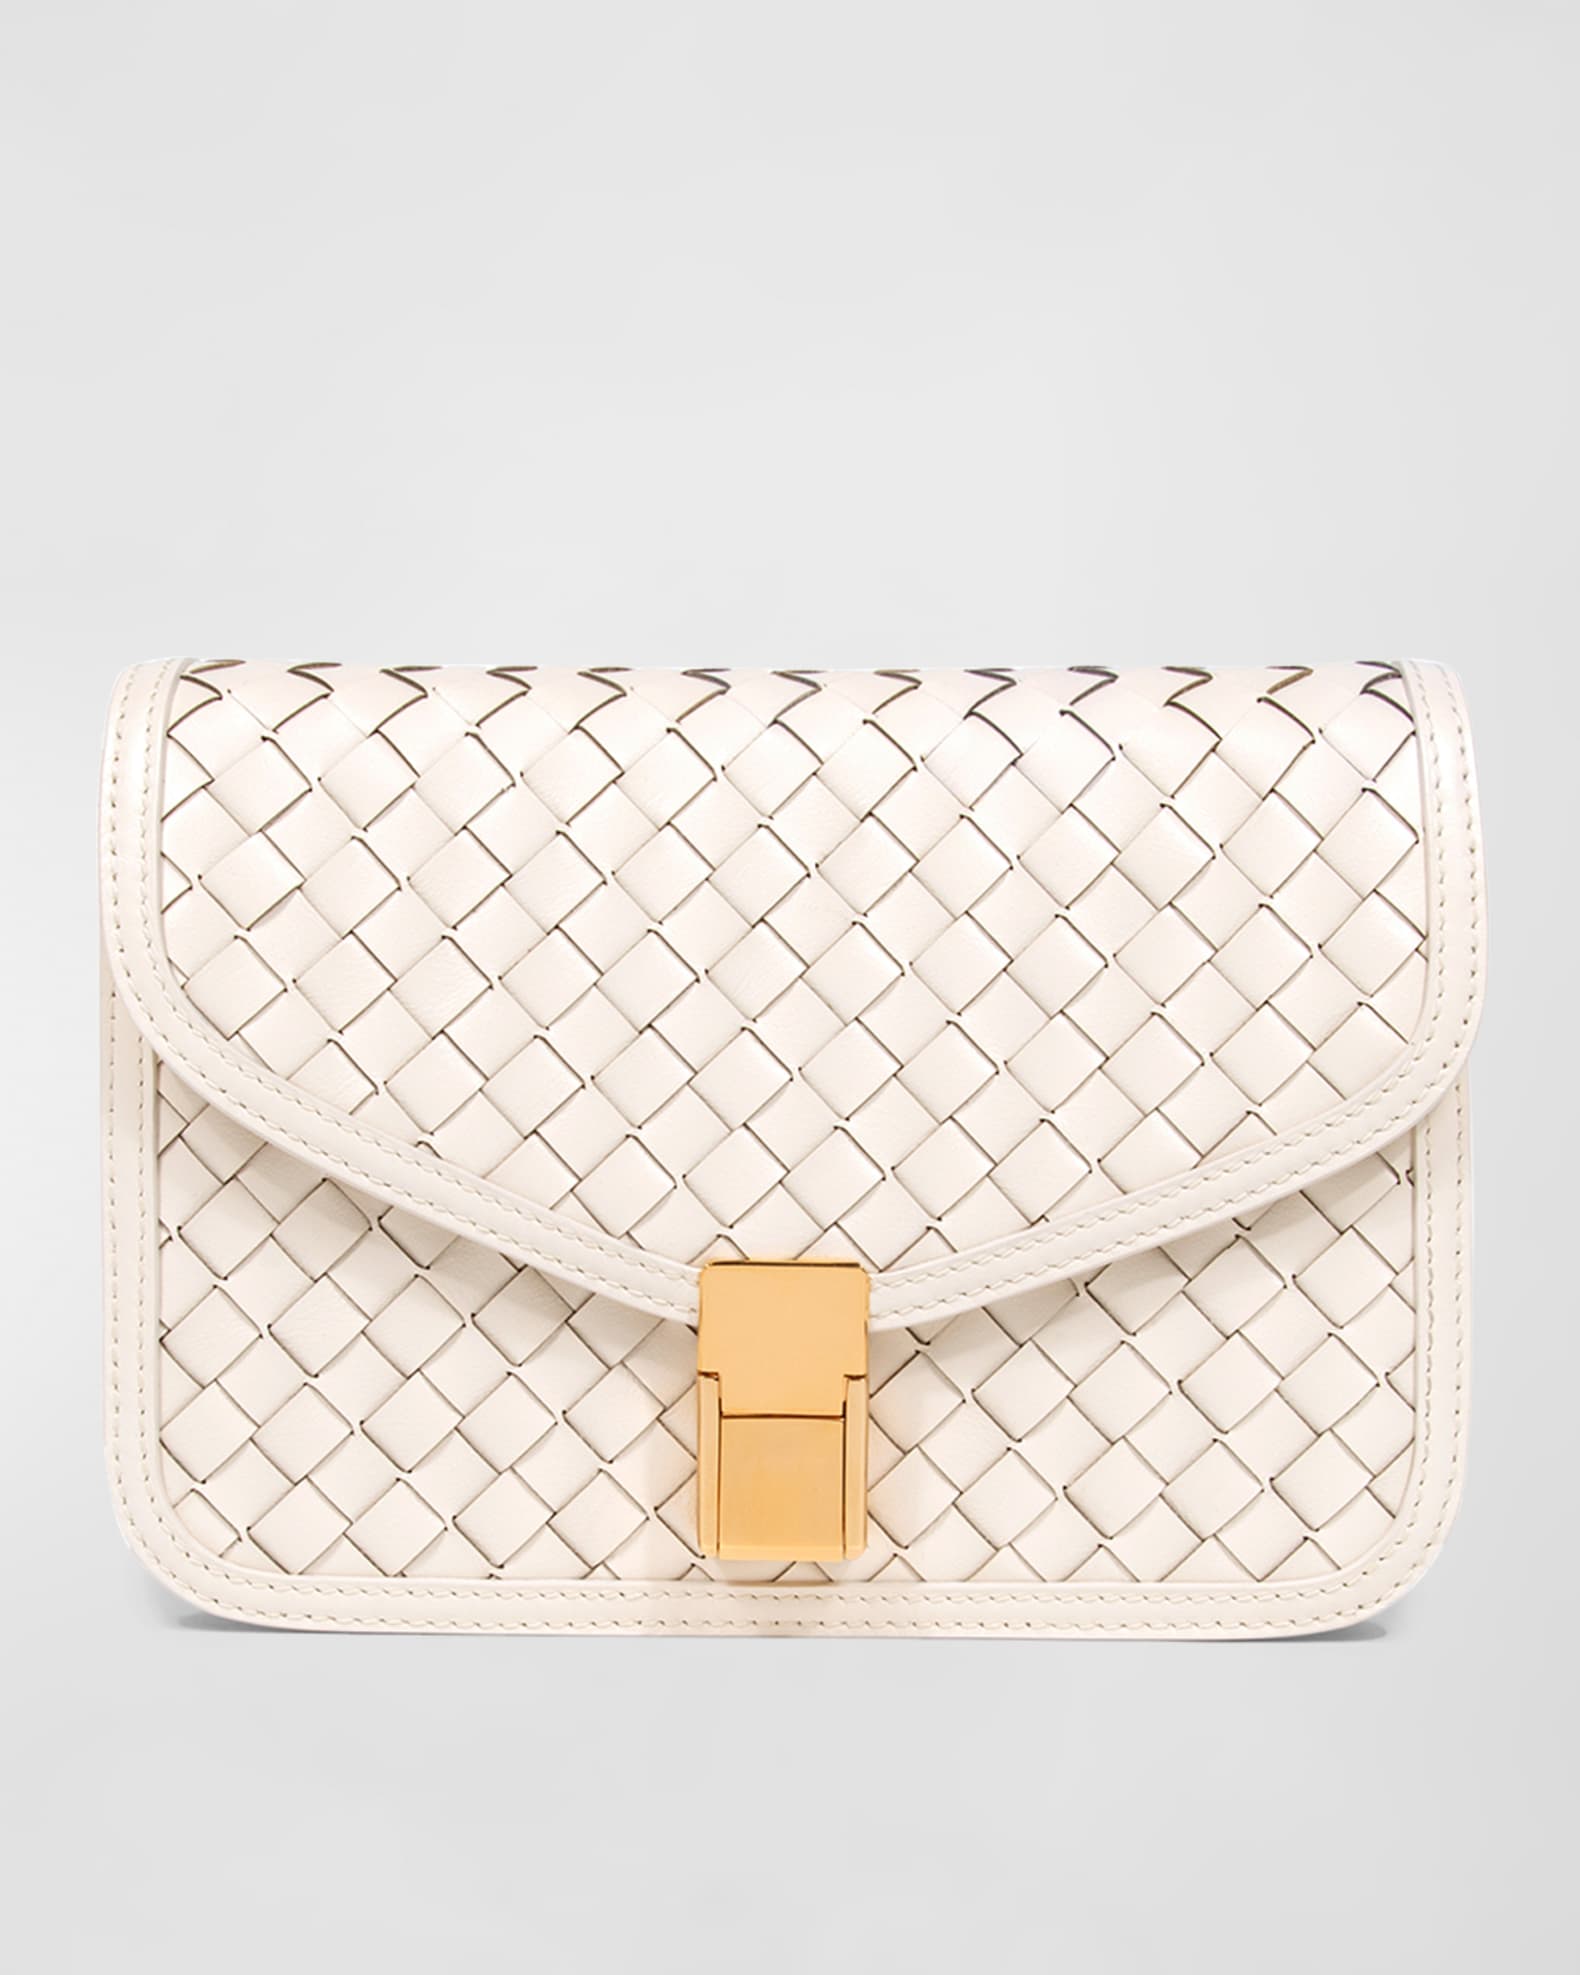 Neiman Marcus Woven Leather Backpack - Neutrals Backpacks